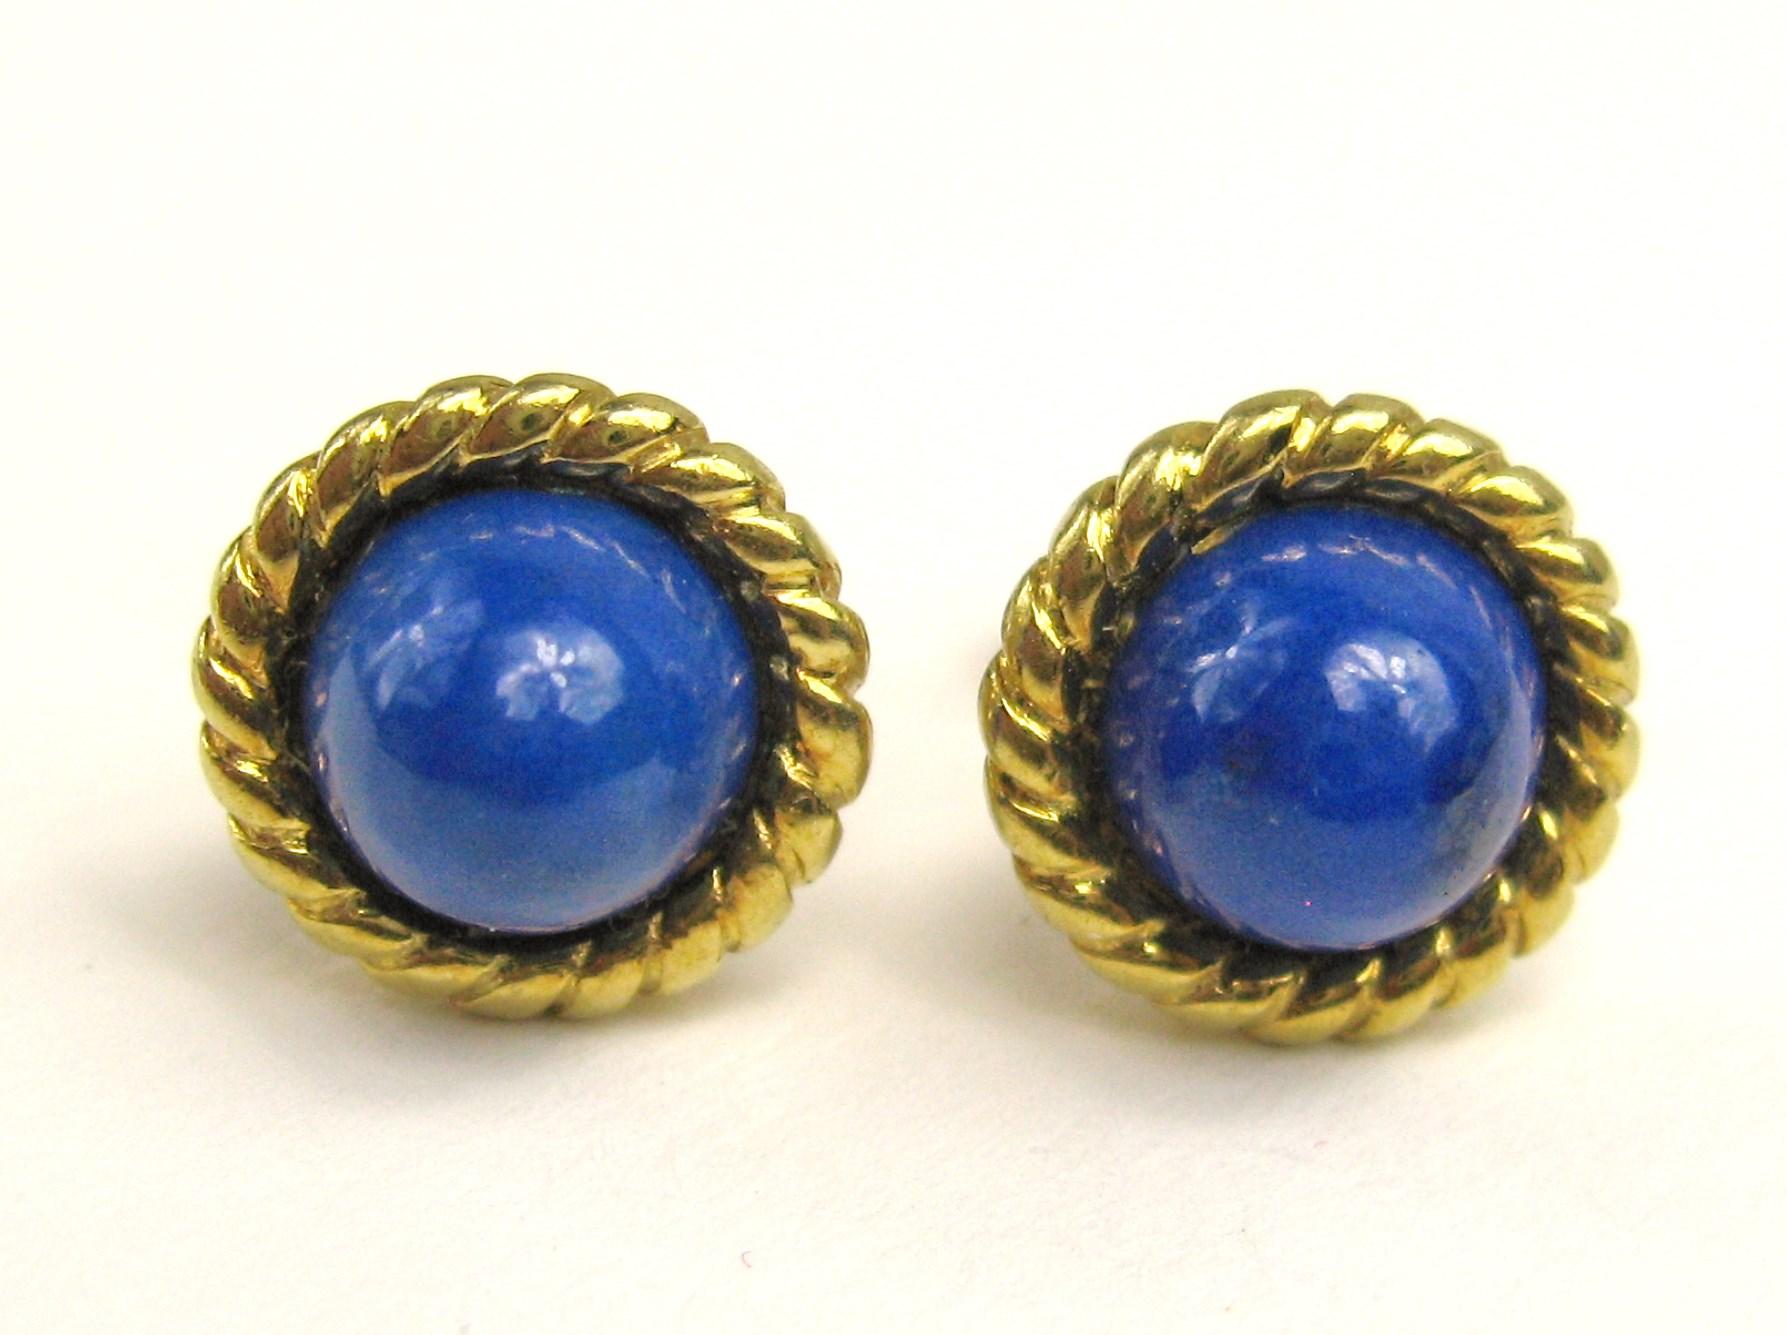 Tiffany & Co. 18k Gold 7mm Lapis Lazuli Stud Earrings. Hallmarked Tiffany & co. 18K Gold. With Original Box. Be sure to check our store front for more fabulous pieces from this collection. We have been selling this collection on 1st dibs since 2013.